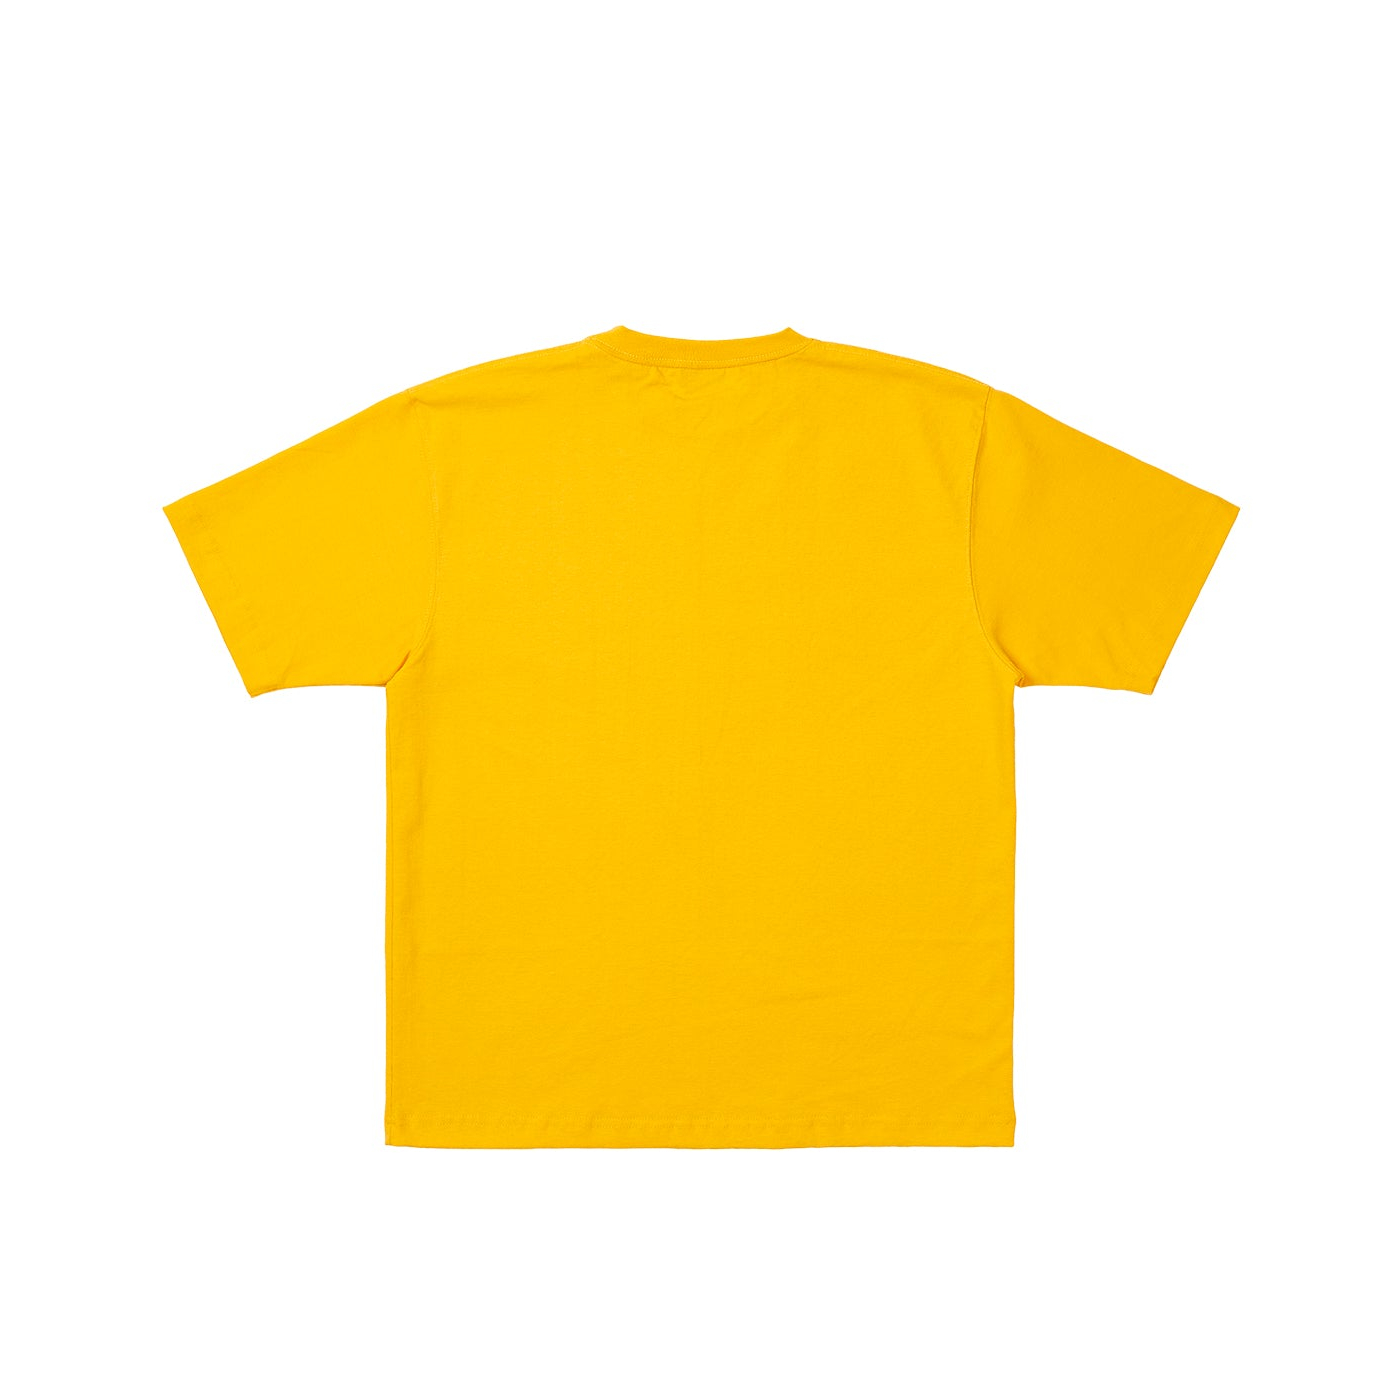 Thumbnail PALACE CAMBER T-SHIRT GOLD one color